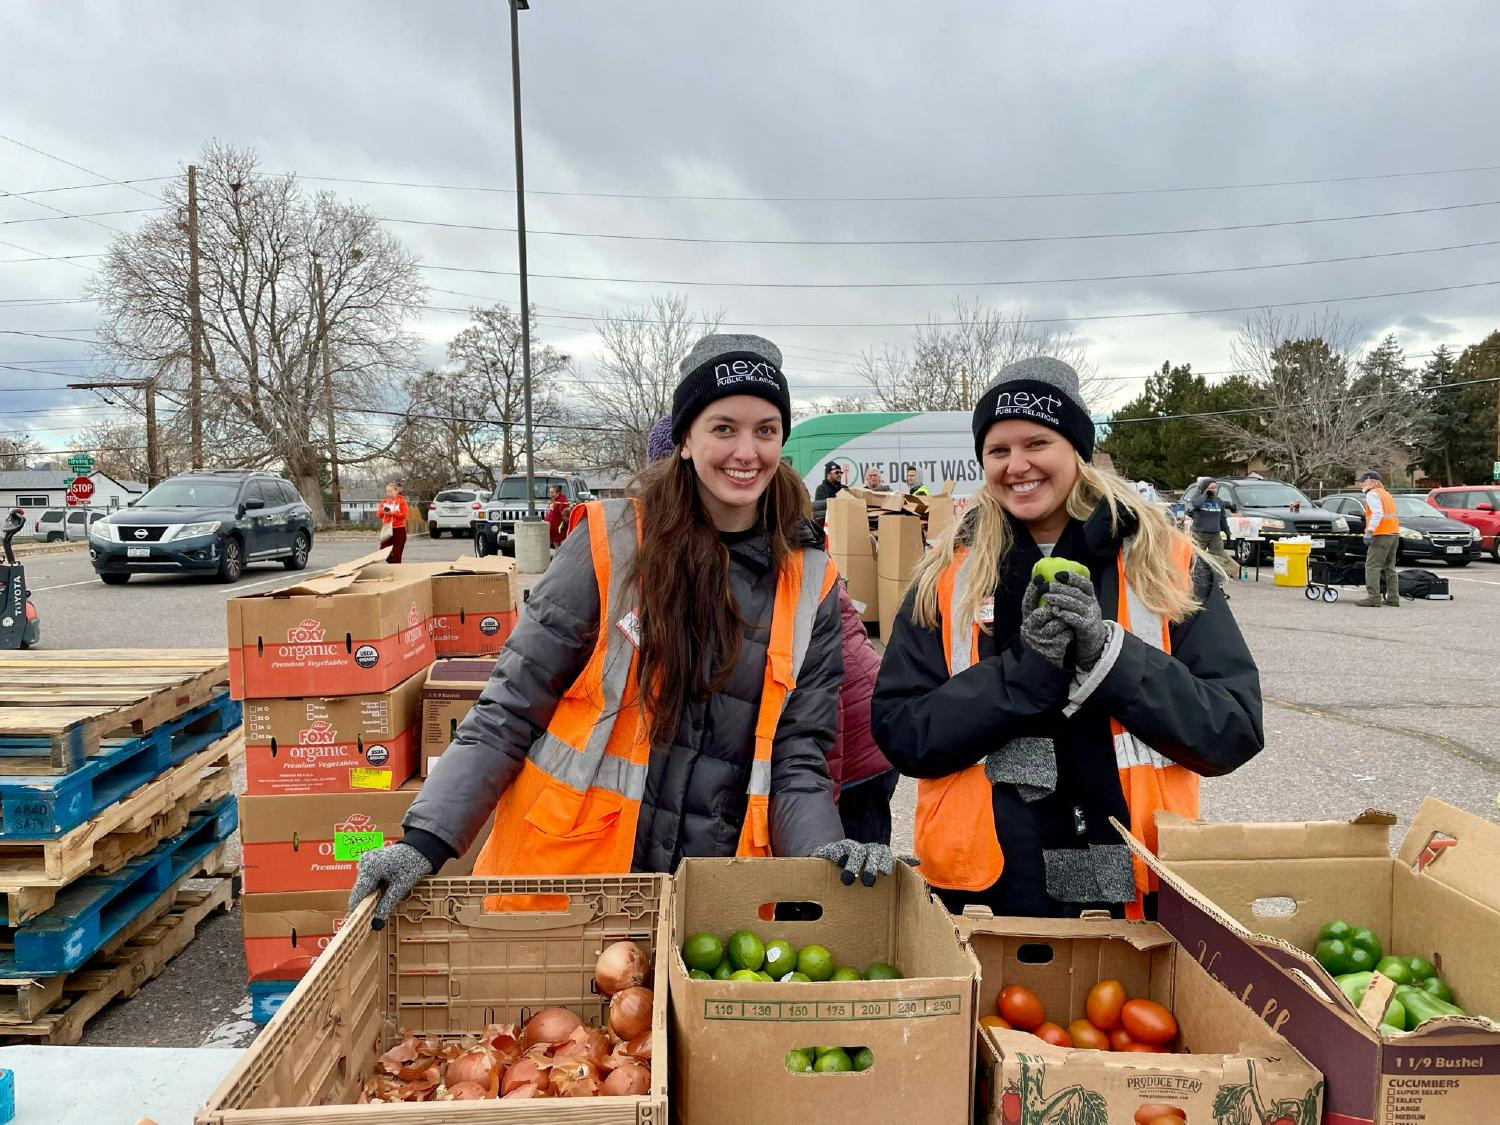 Next PR team members use company-sponsored Volunteer Time Off to sort food for soup kitchens and shelters across Denver.